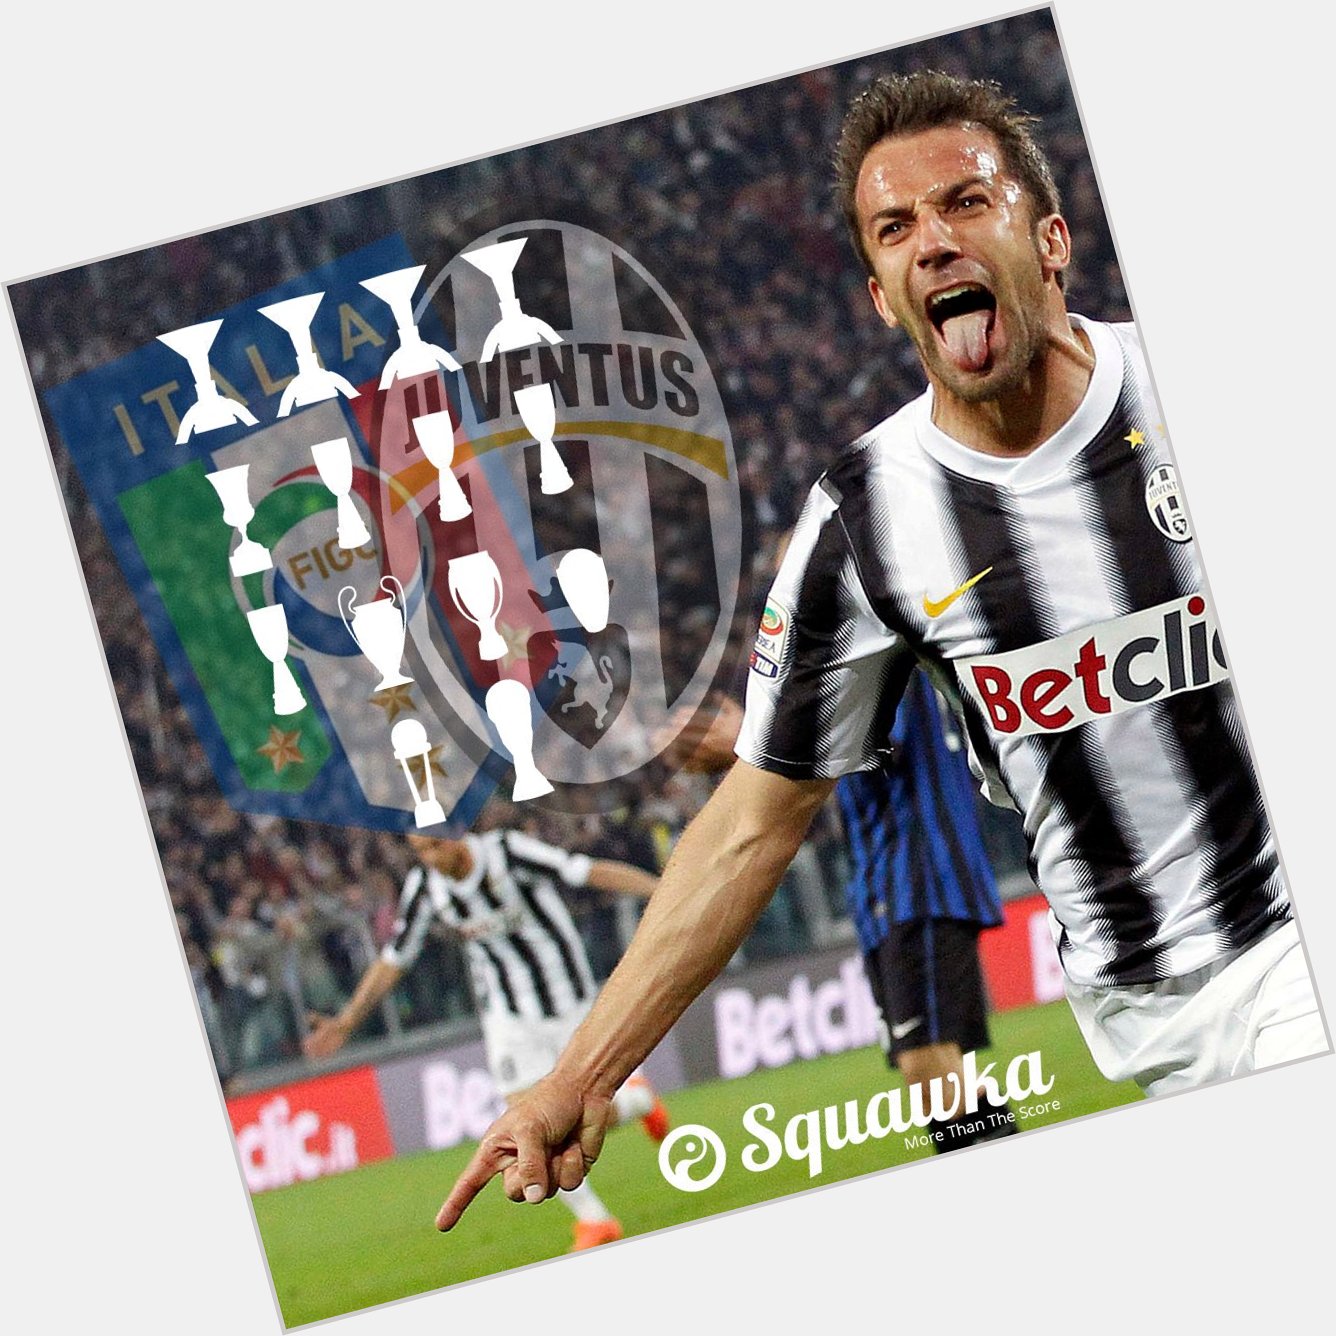 Happy 44th birthday to Alessandro Del Piero.

The all-time top goalscorer in Juventus history (290). 